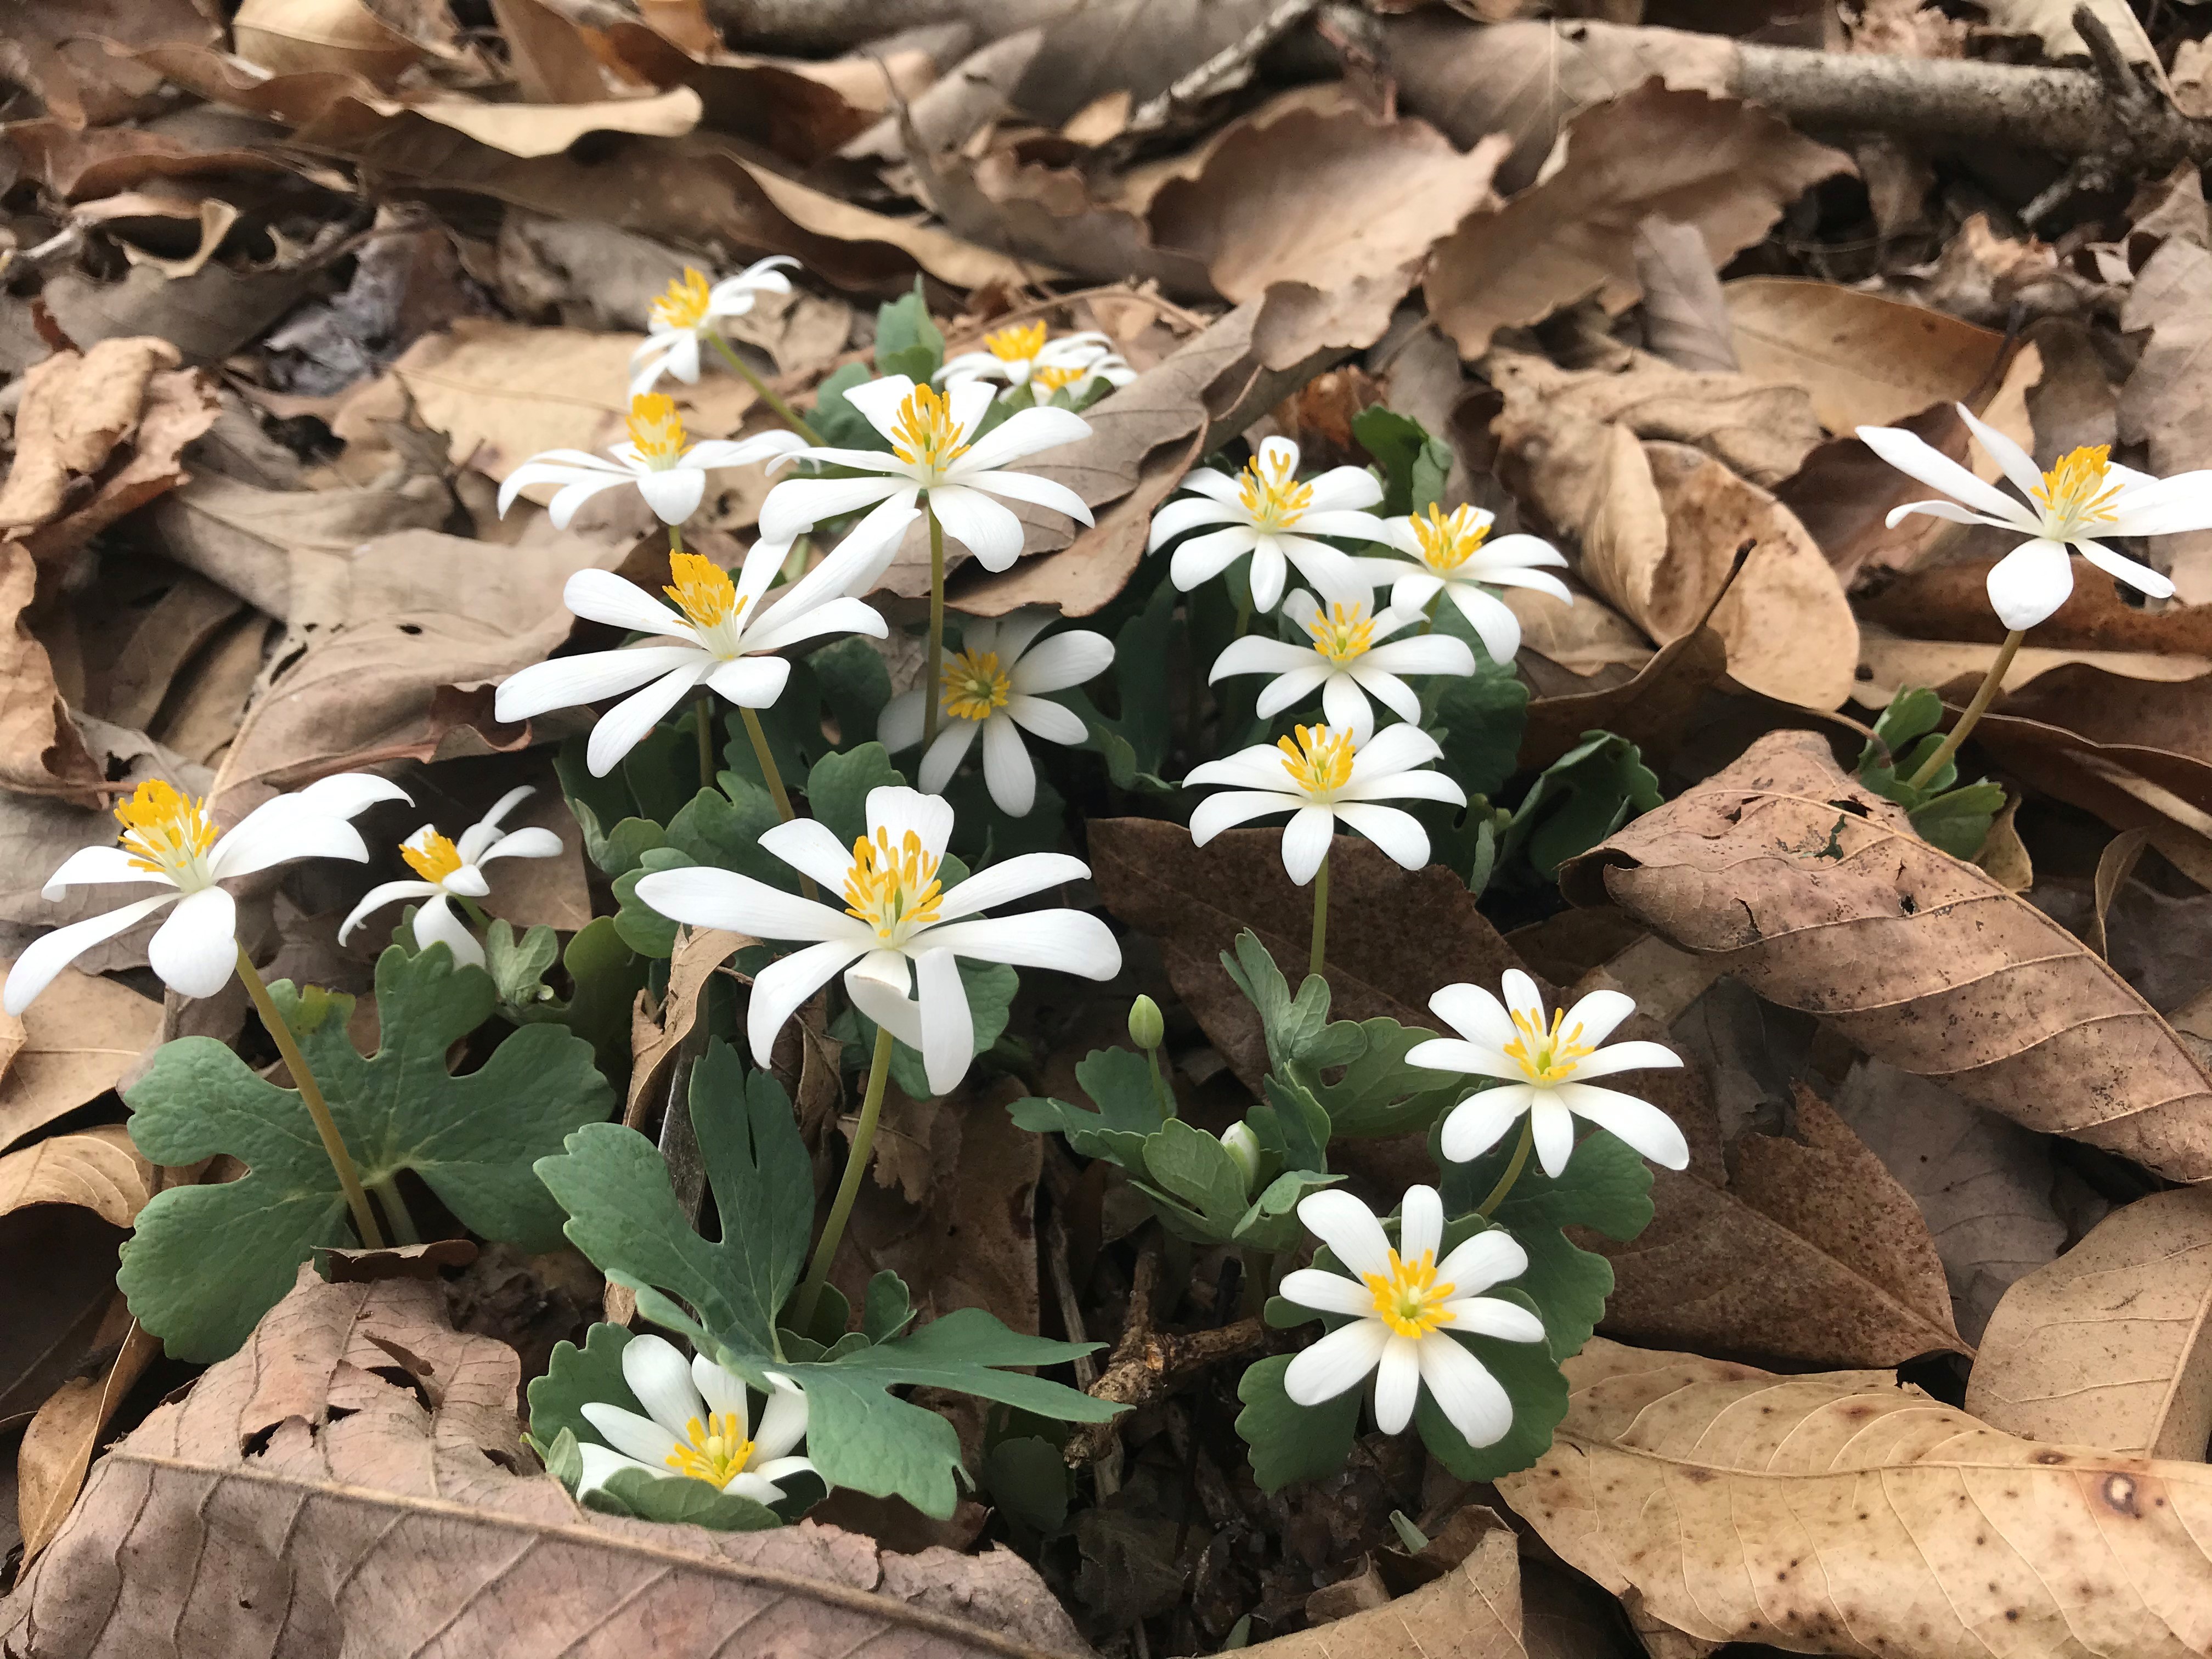 Sanguinaria canadensis, commonly called bloodroot, is a native wildflower that blooms in early spring in rich woods and along streams.